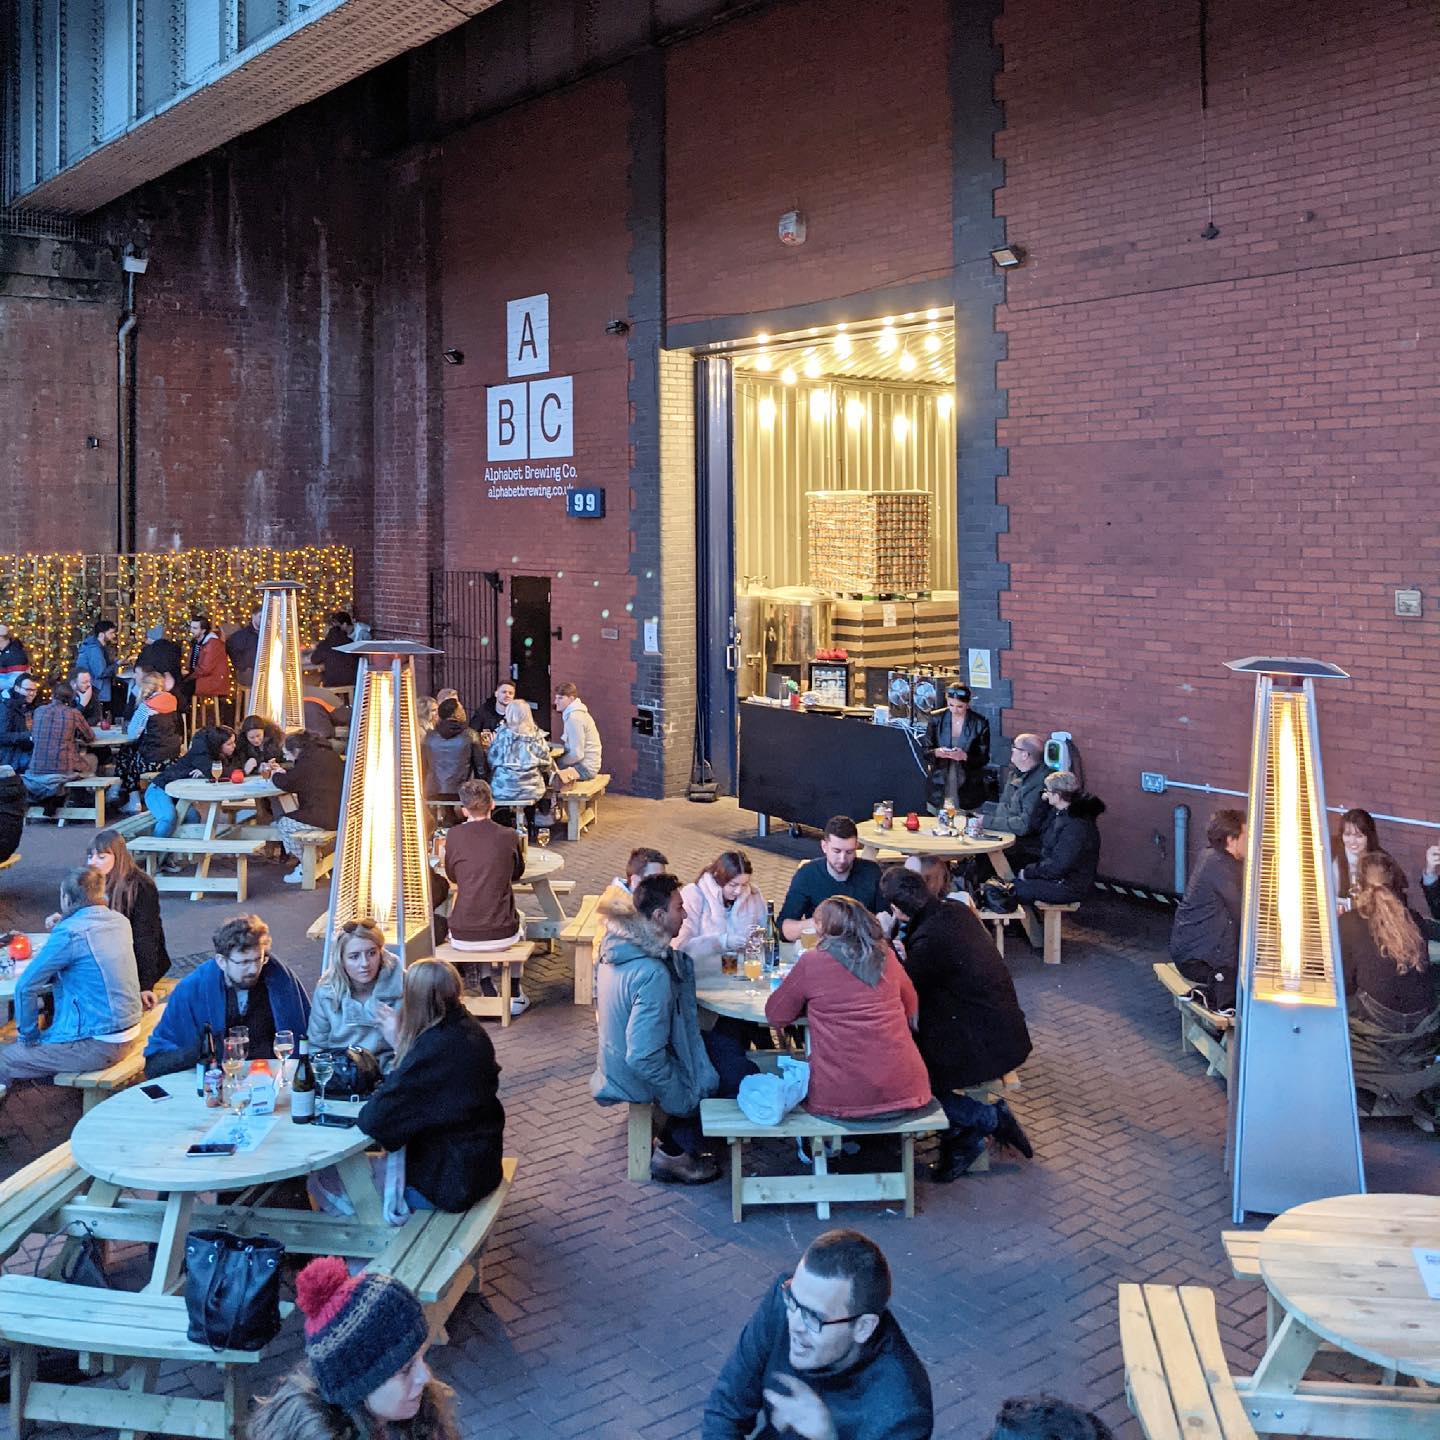 New terrace party series launches under the archways at ABC Taproom, The Manc